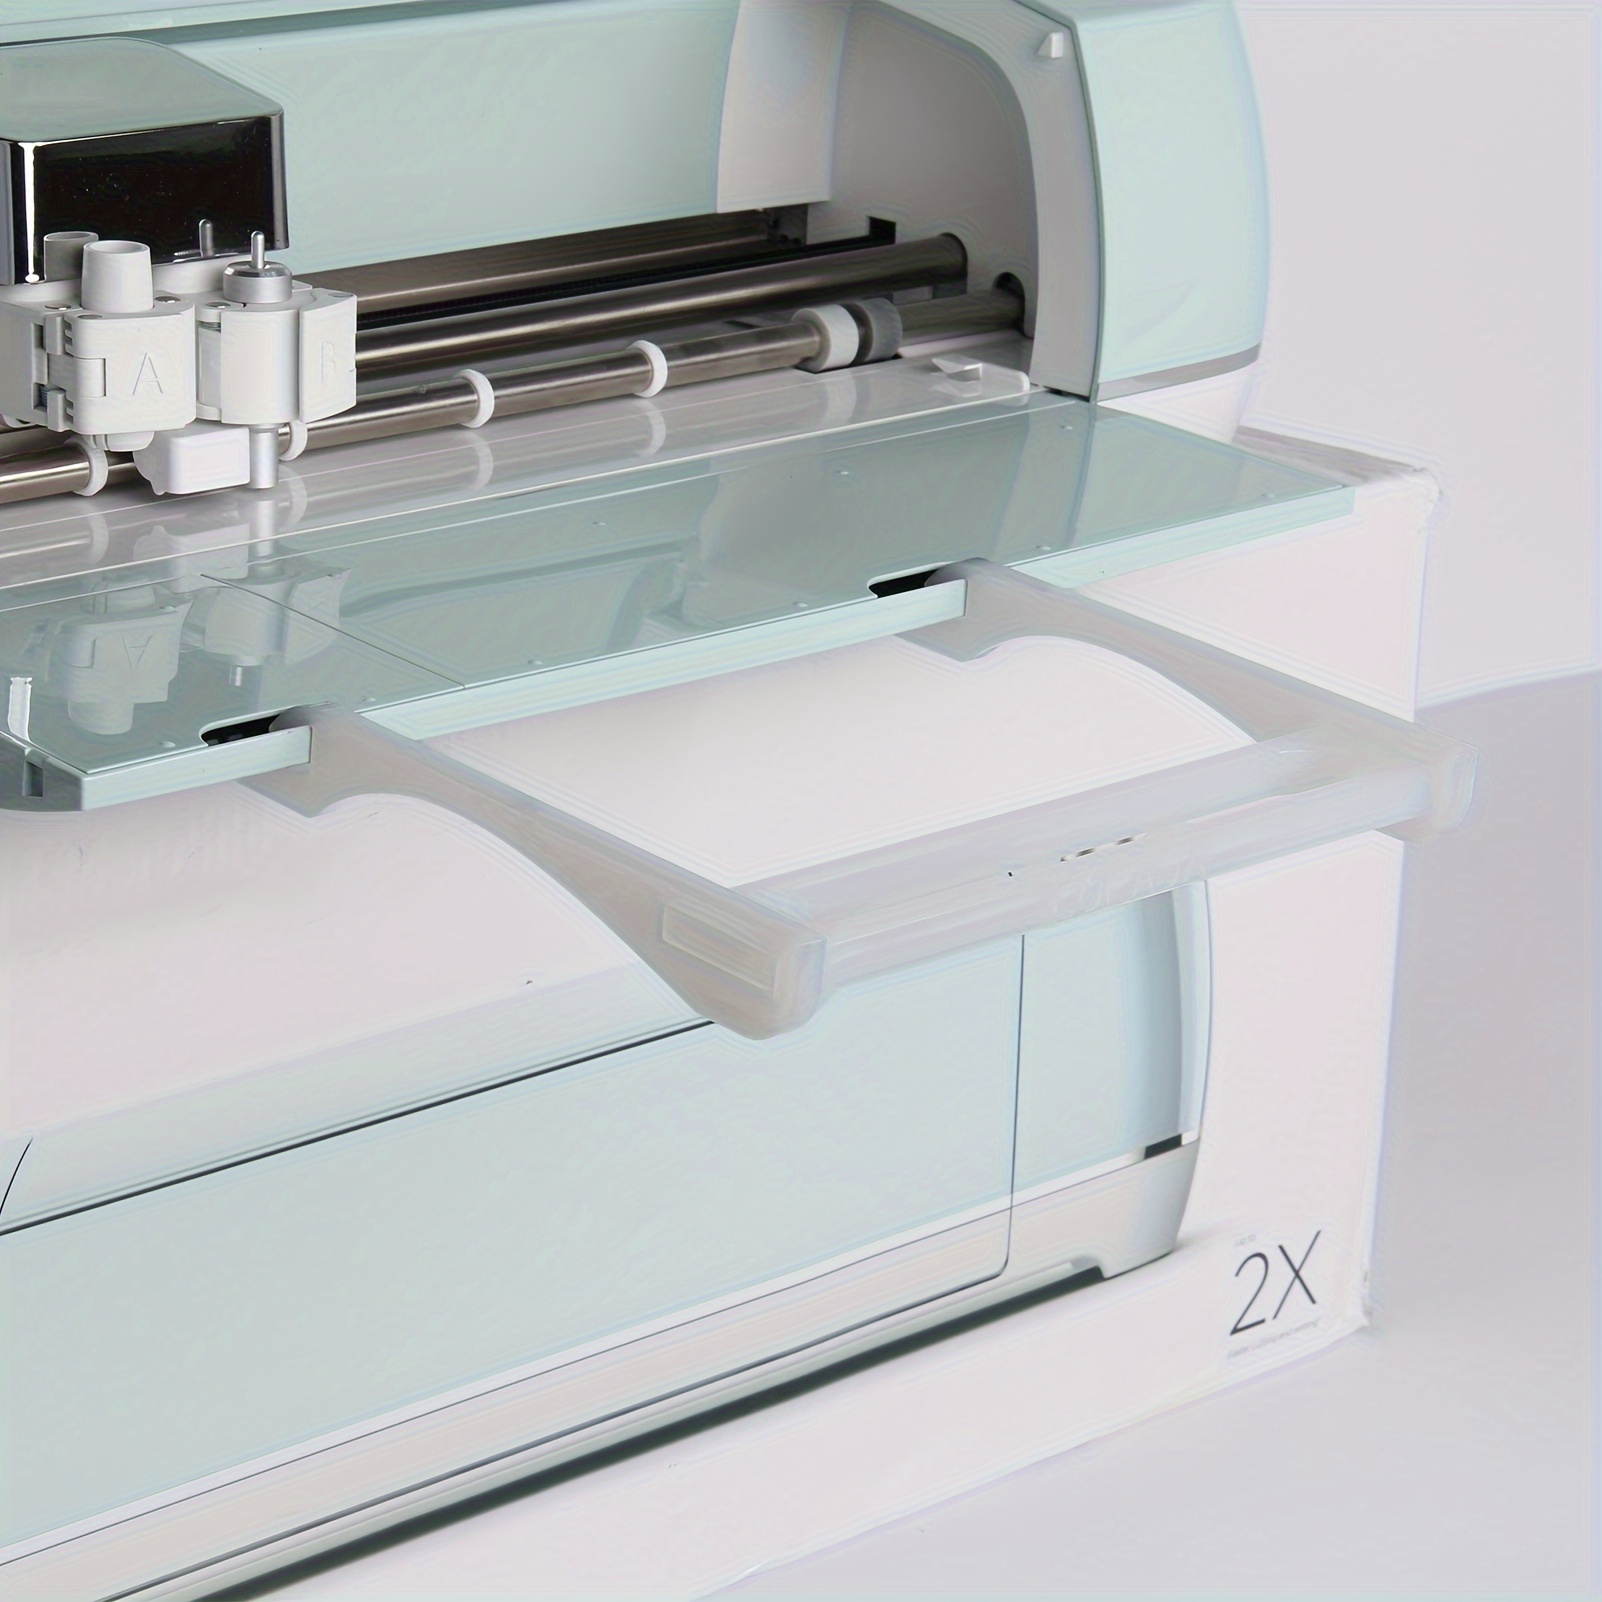 Cricut Explore Air 2 with Accessories - Die Cutting & Embossing